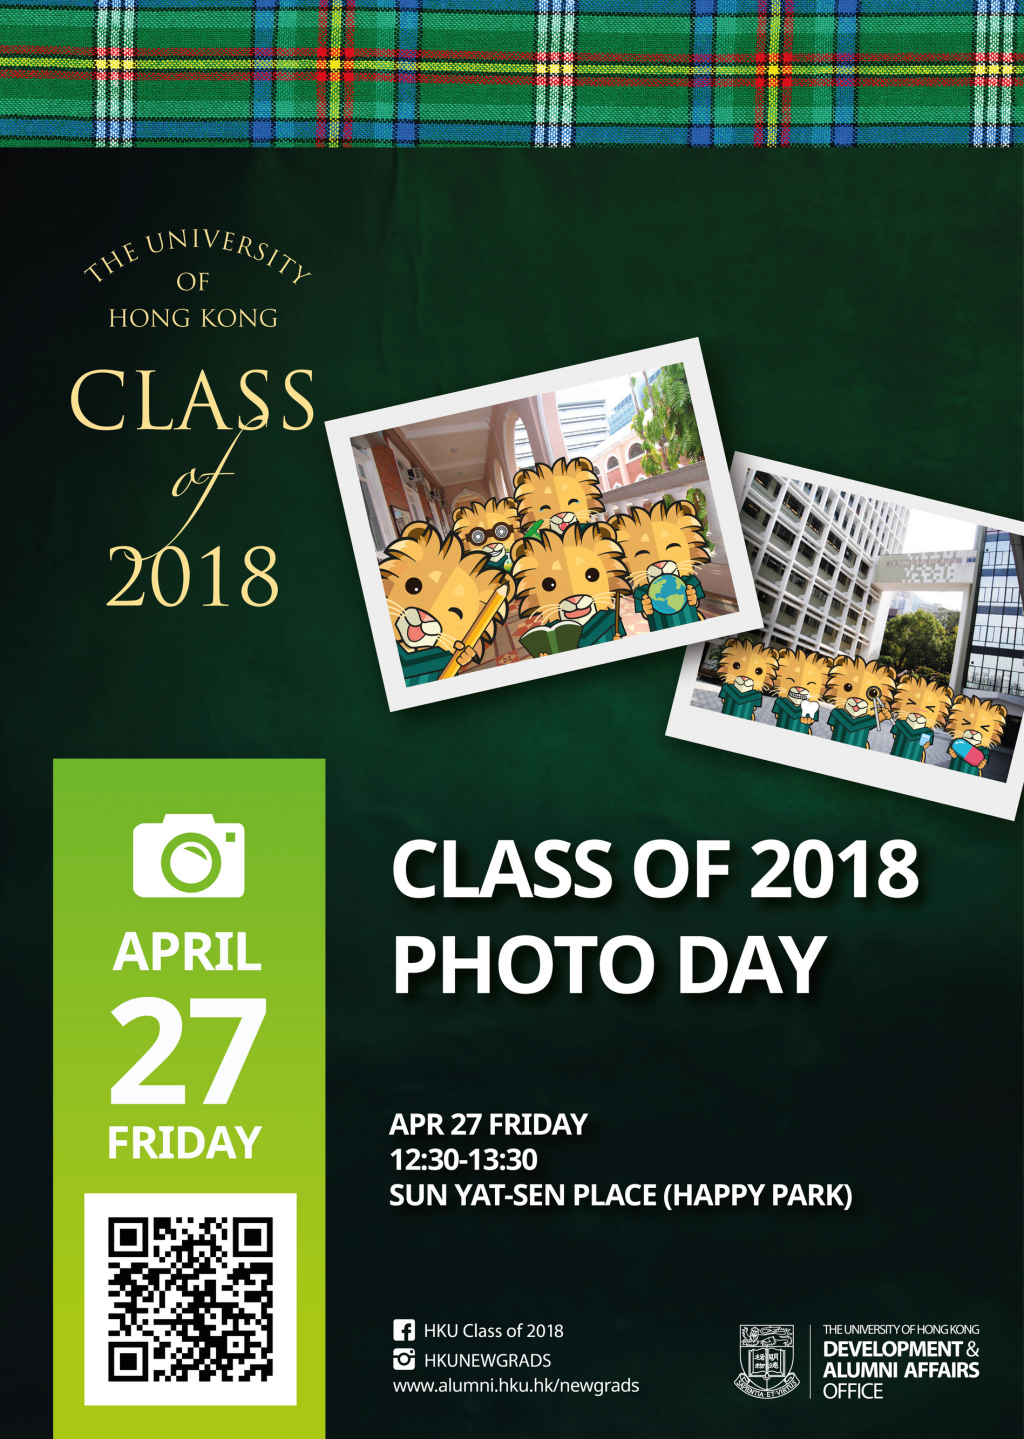 Class of 2018 Photo Day